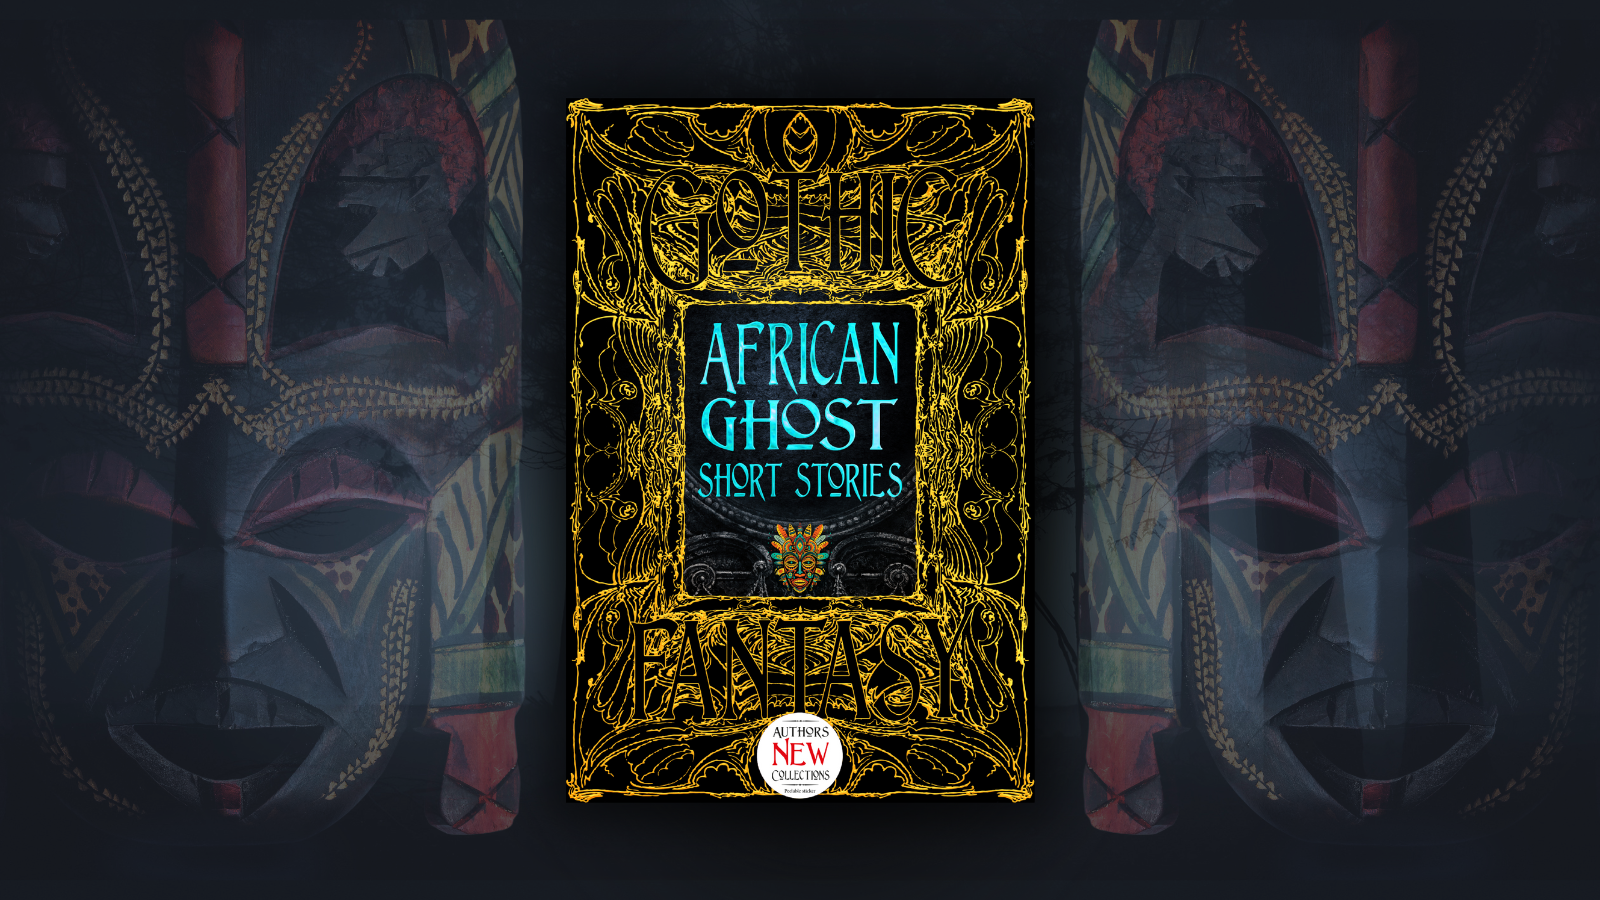 African ghost short stories flame tree